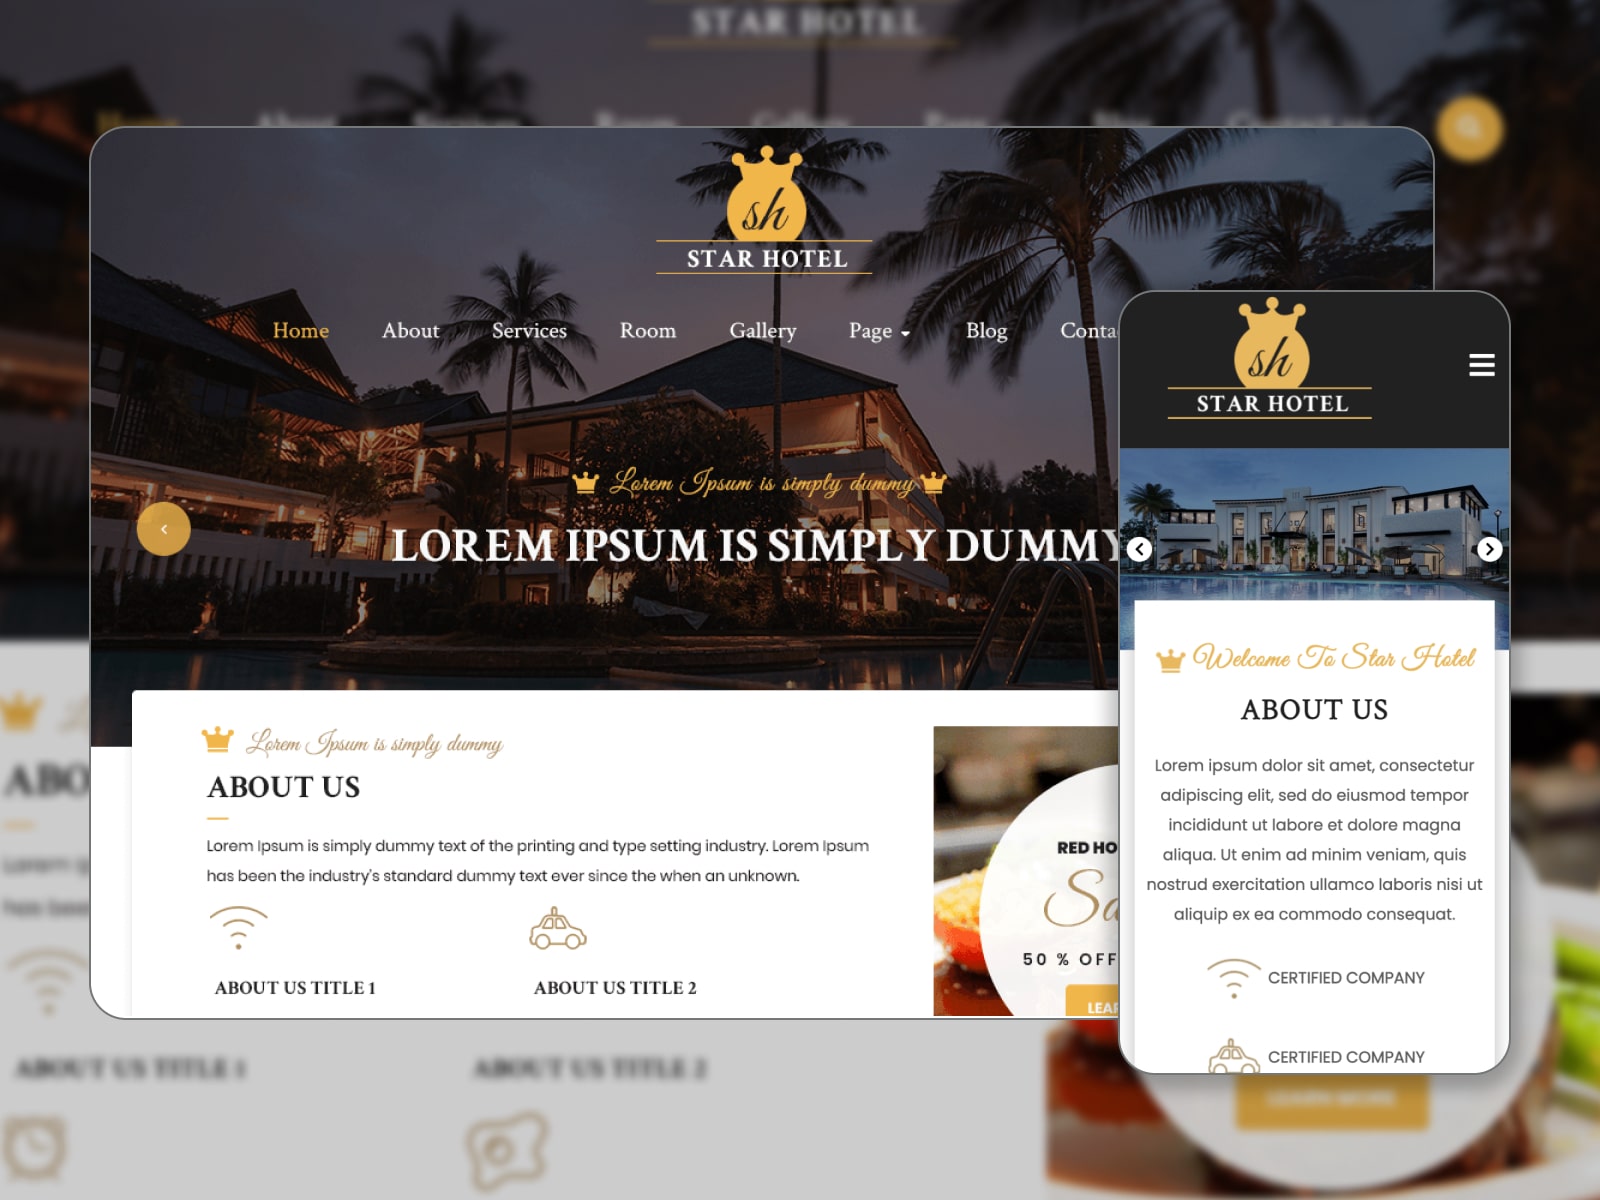 Collage of the VW Hotel WordPress theme demo website in brown, blue and white colors.